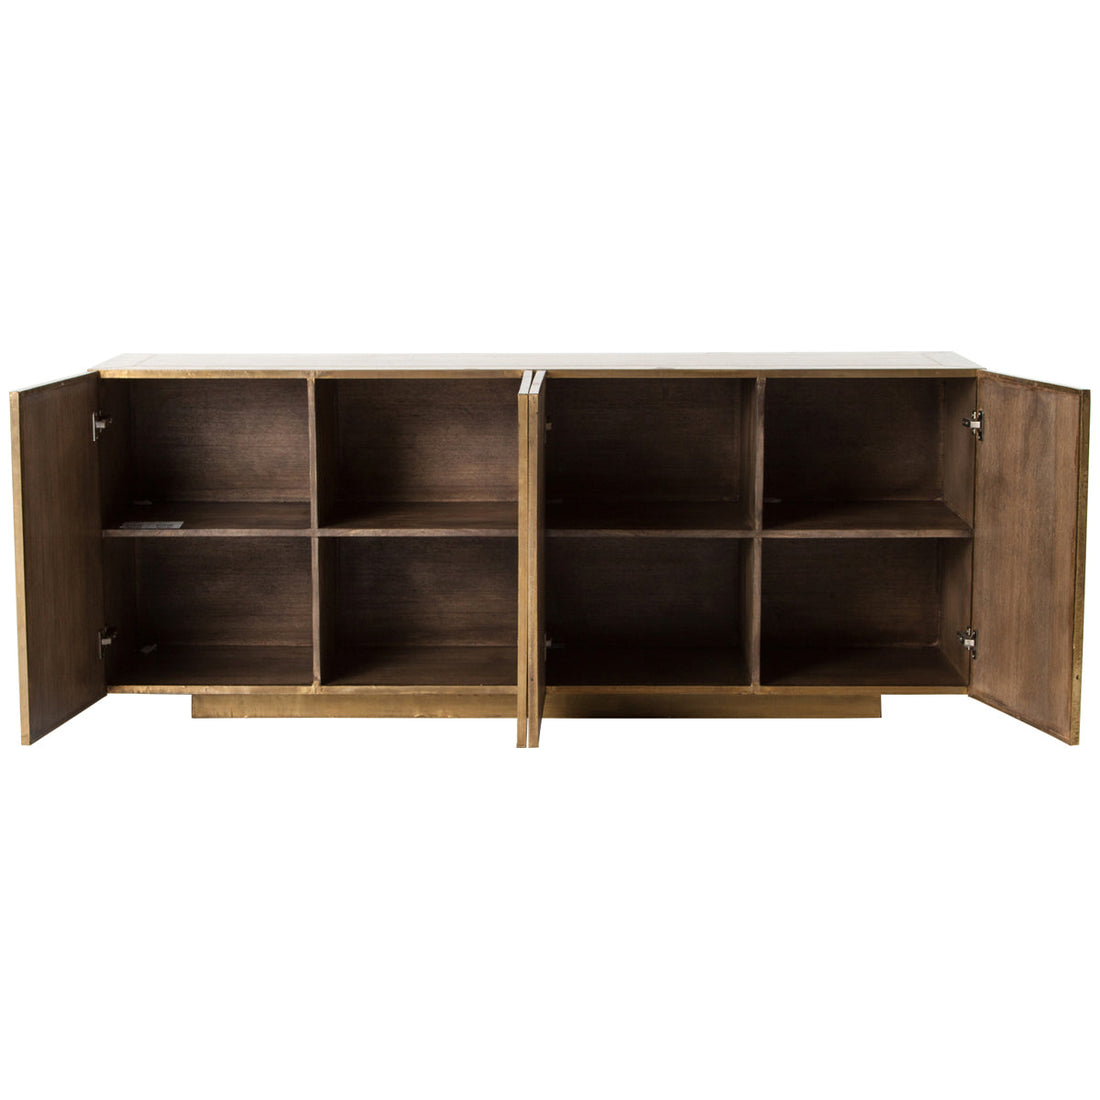 Four Hands Rockwell Freda Sideboard - Aged Brass